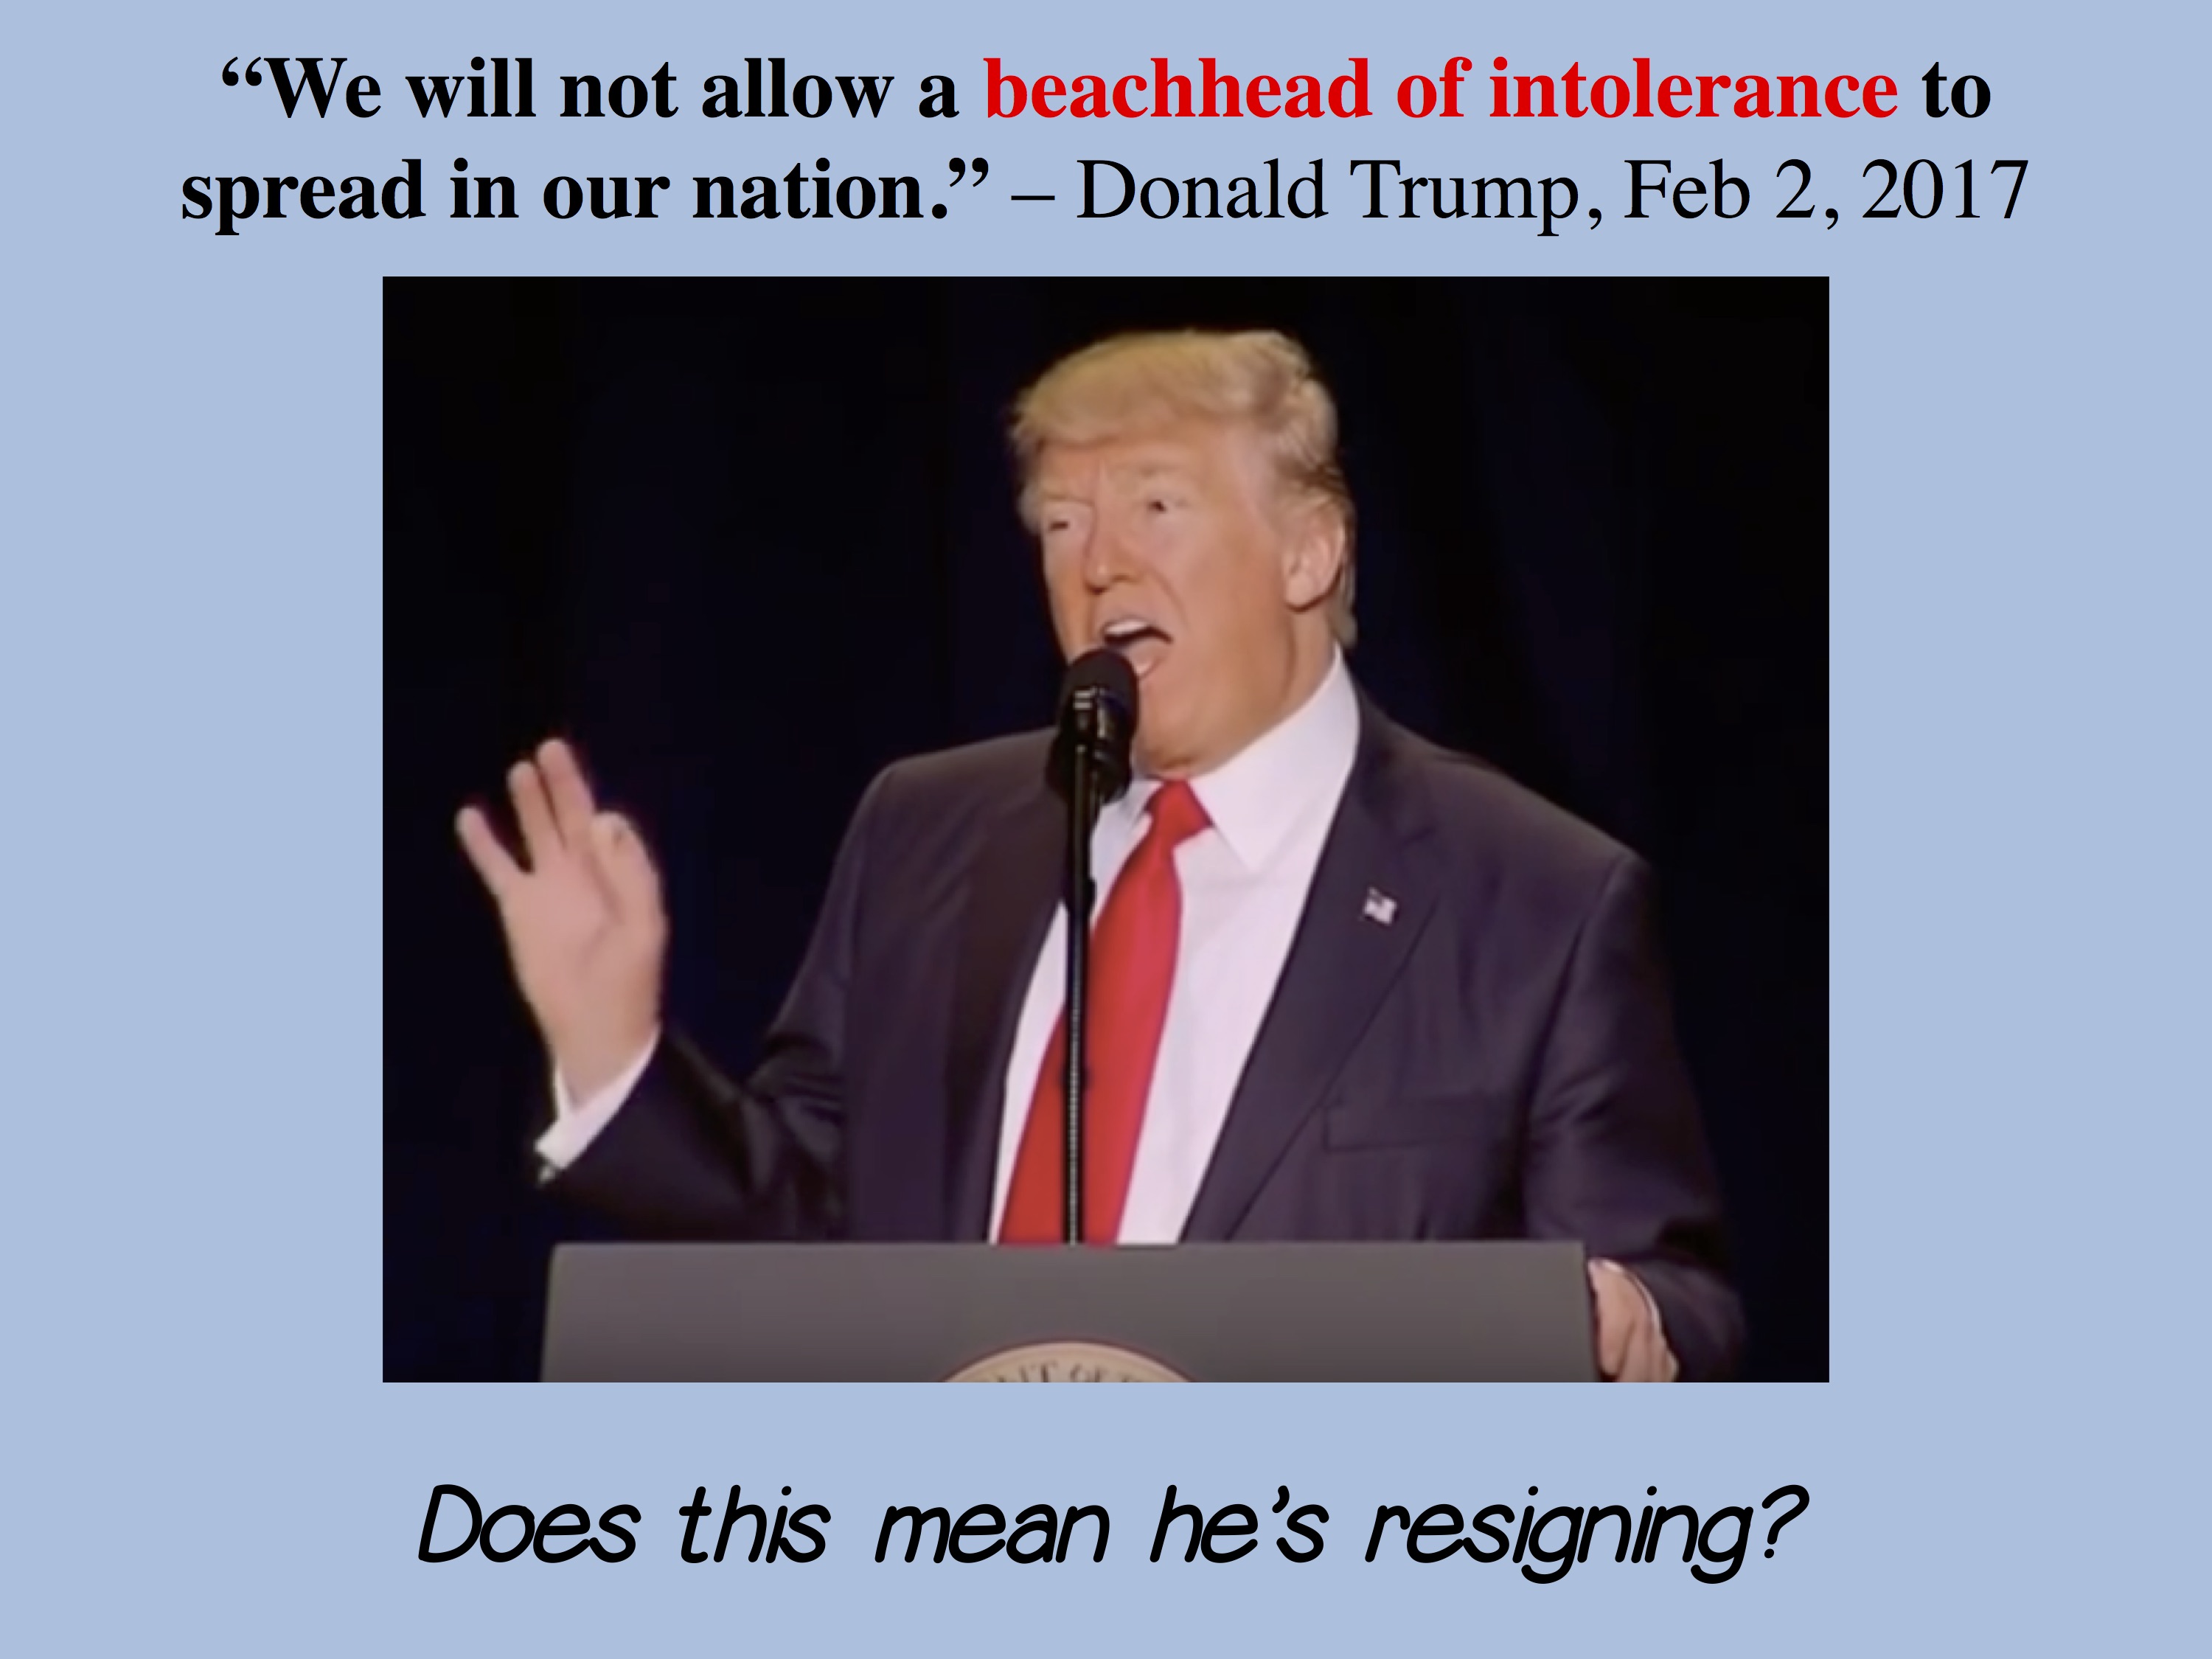 Trump says he won't allow intolerance; Does this mean he's resigning?